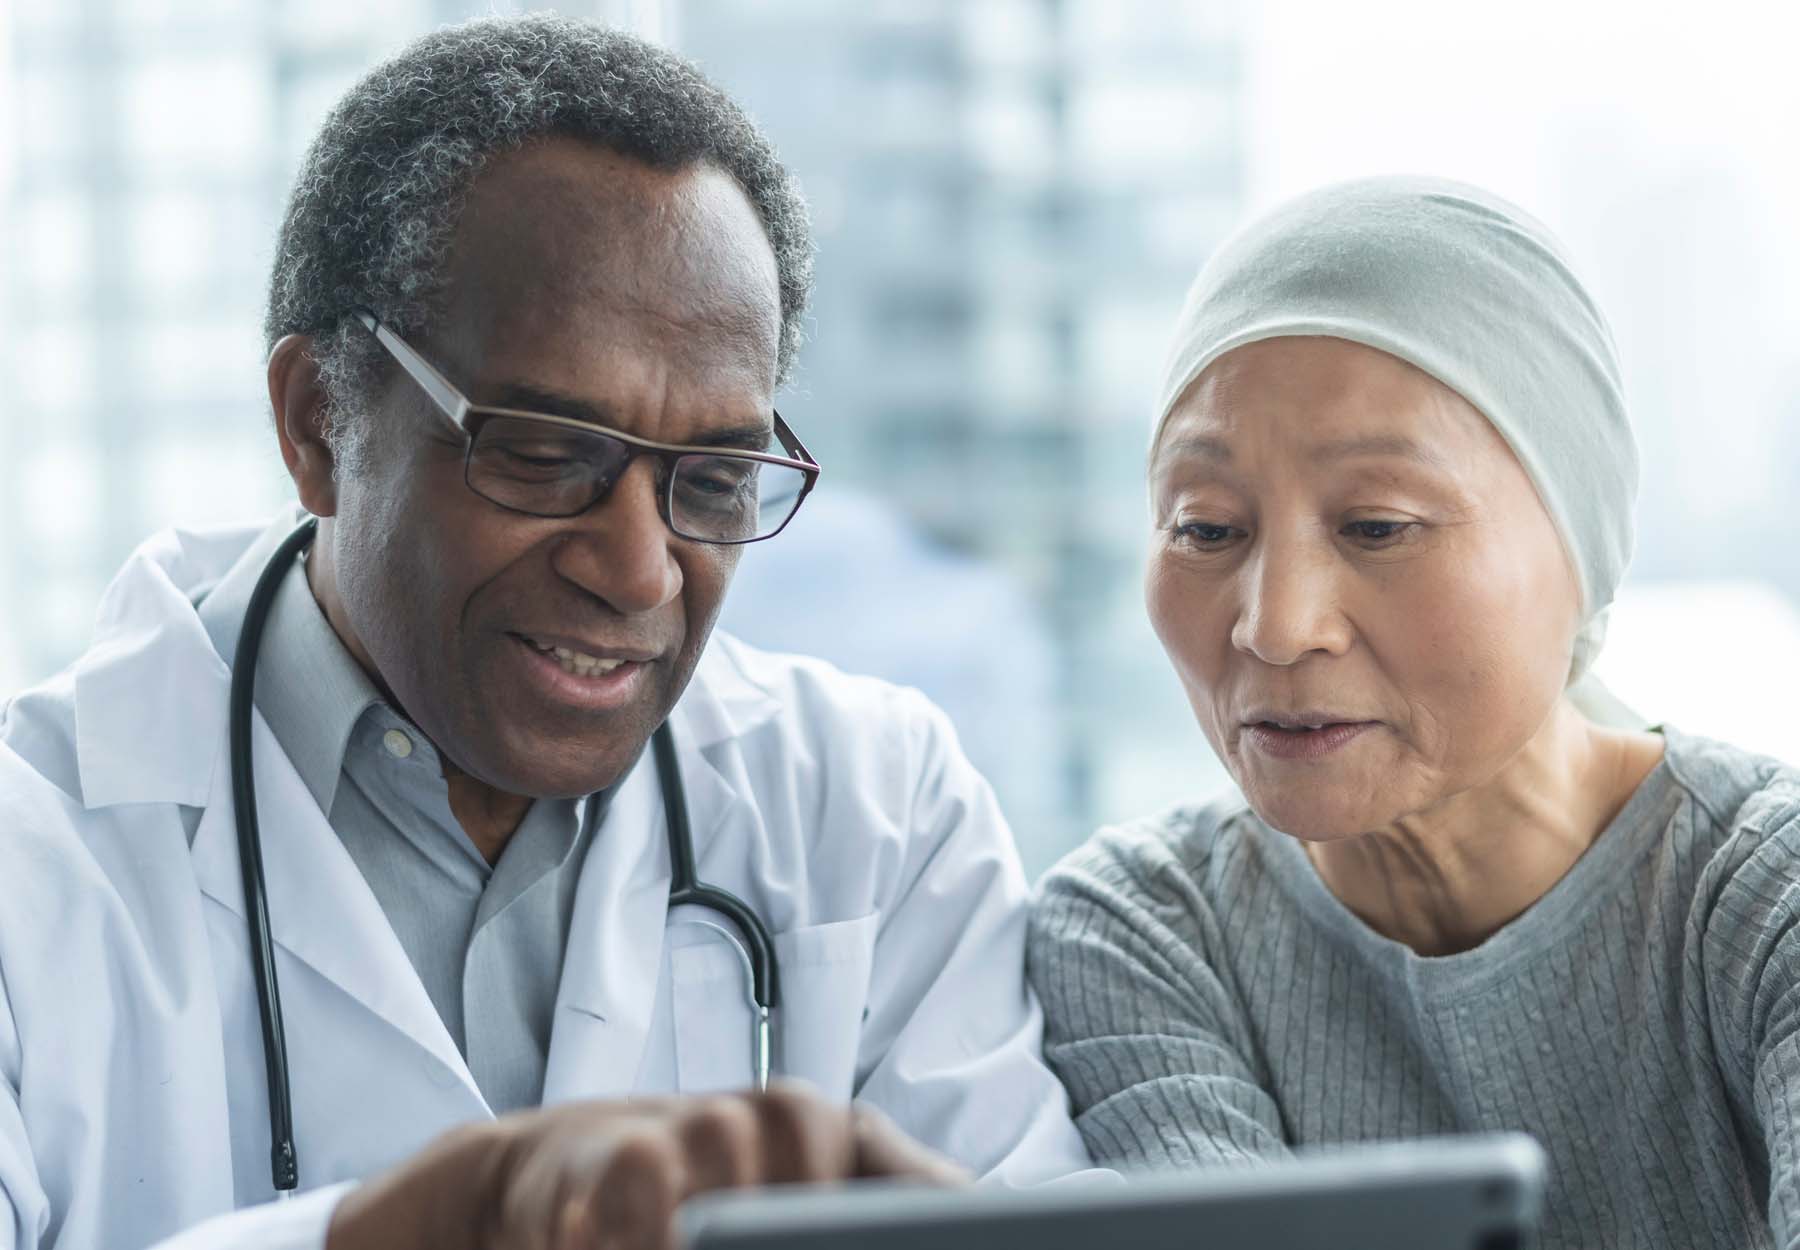 A female cancer patient discusses treatment options with her doctor.